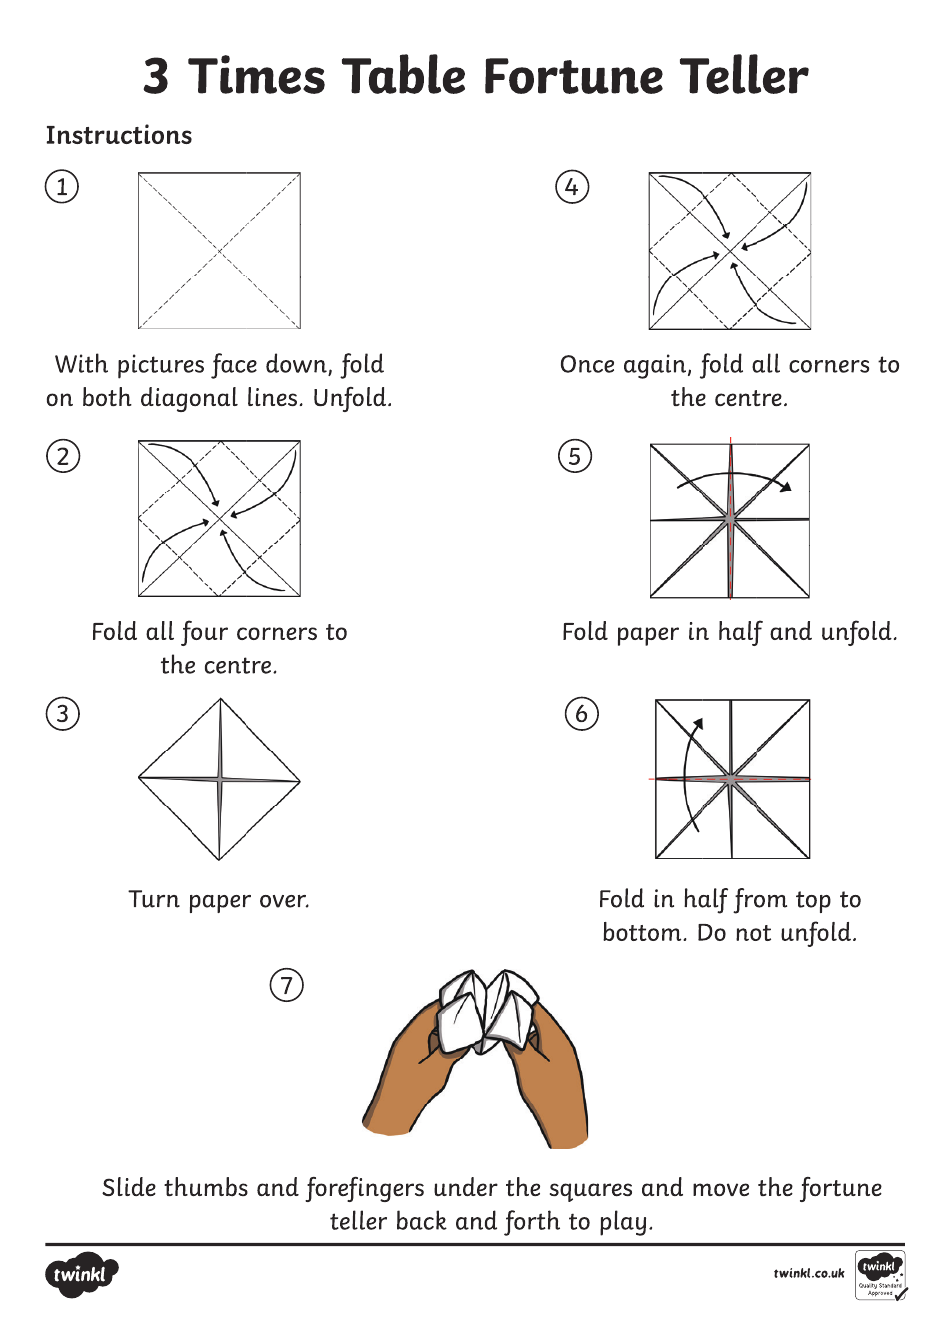 3 Times Table Fortune Teller Template, Page 1